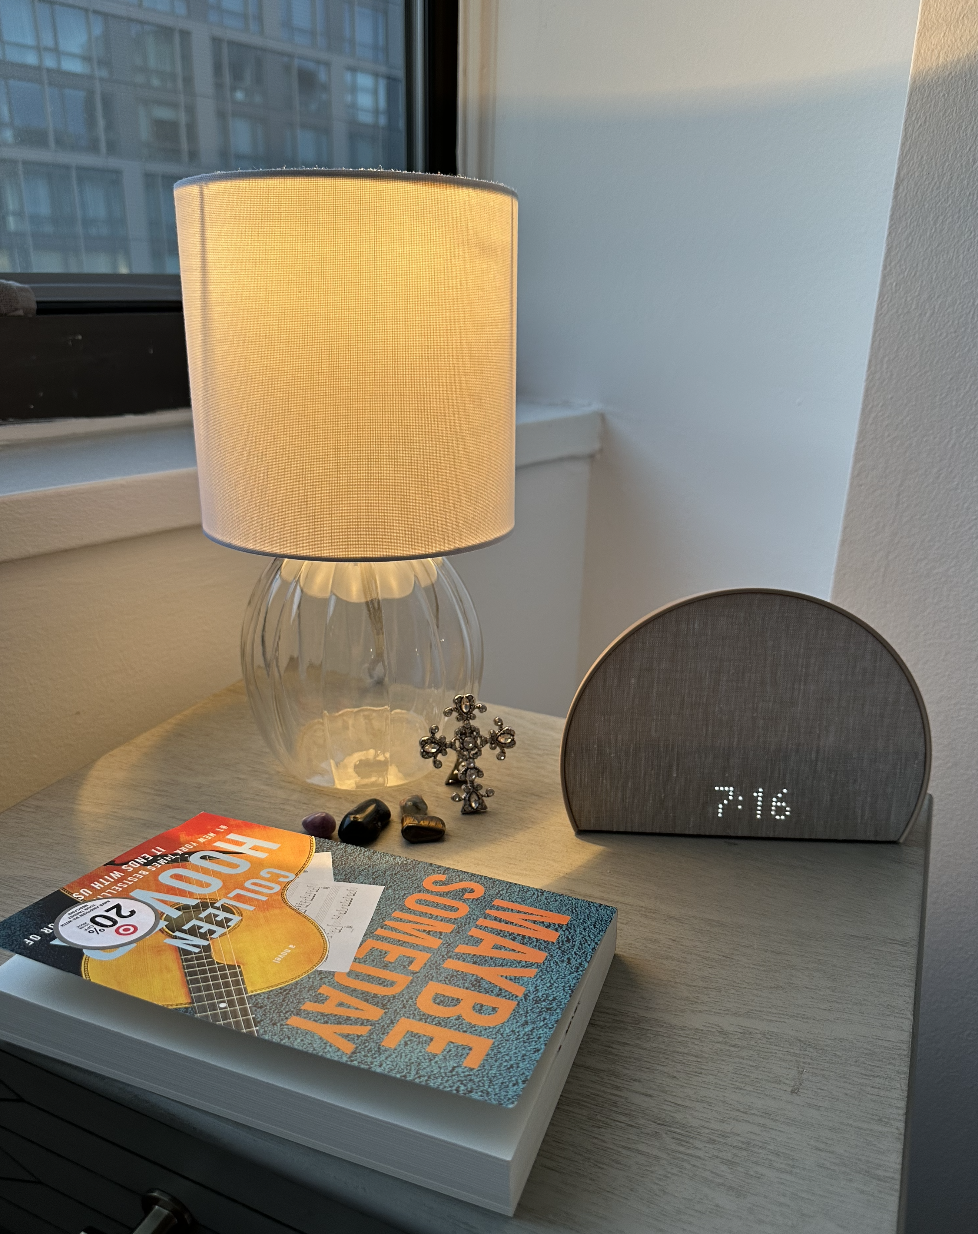 Table with lamp, alarm clock reading 9:16, and a book titled &quot;Maybe Someday&quot;. Decor includes earrings and stones